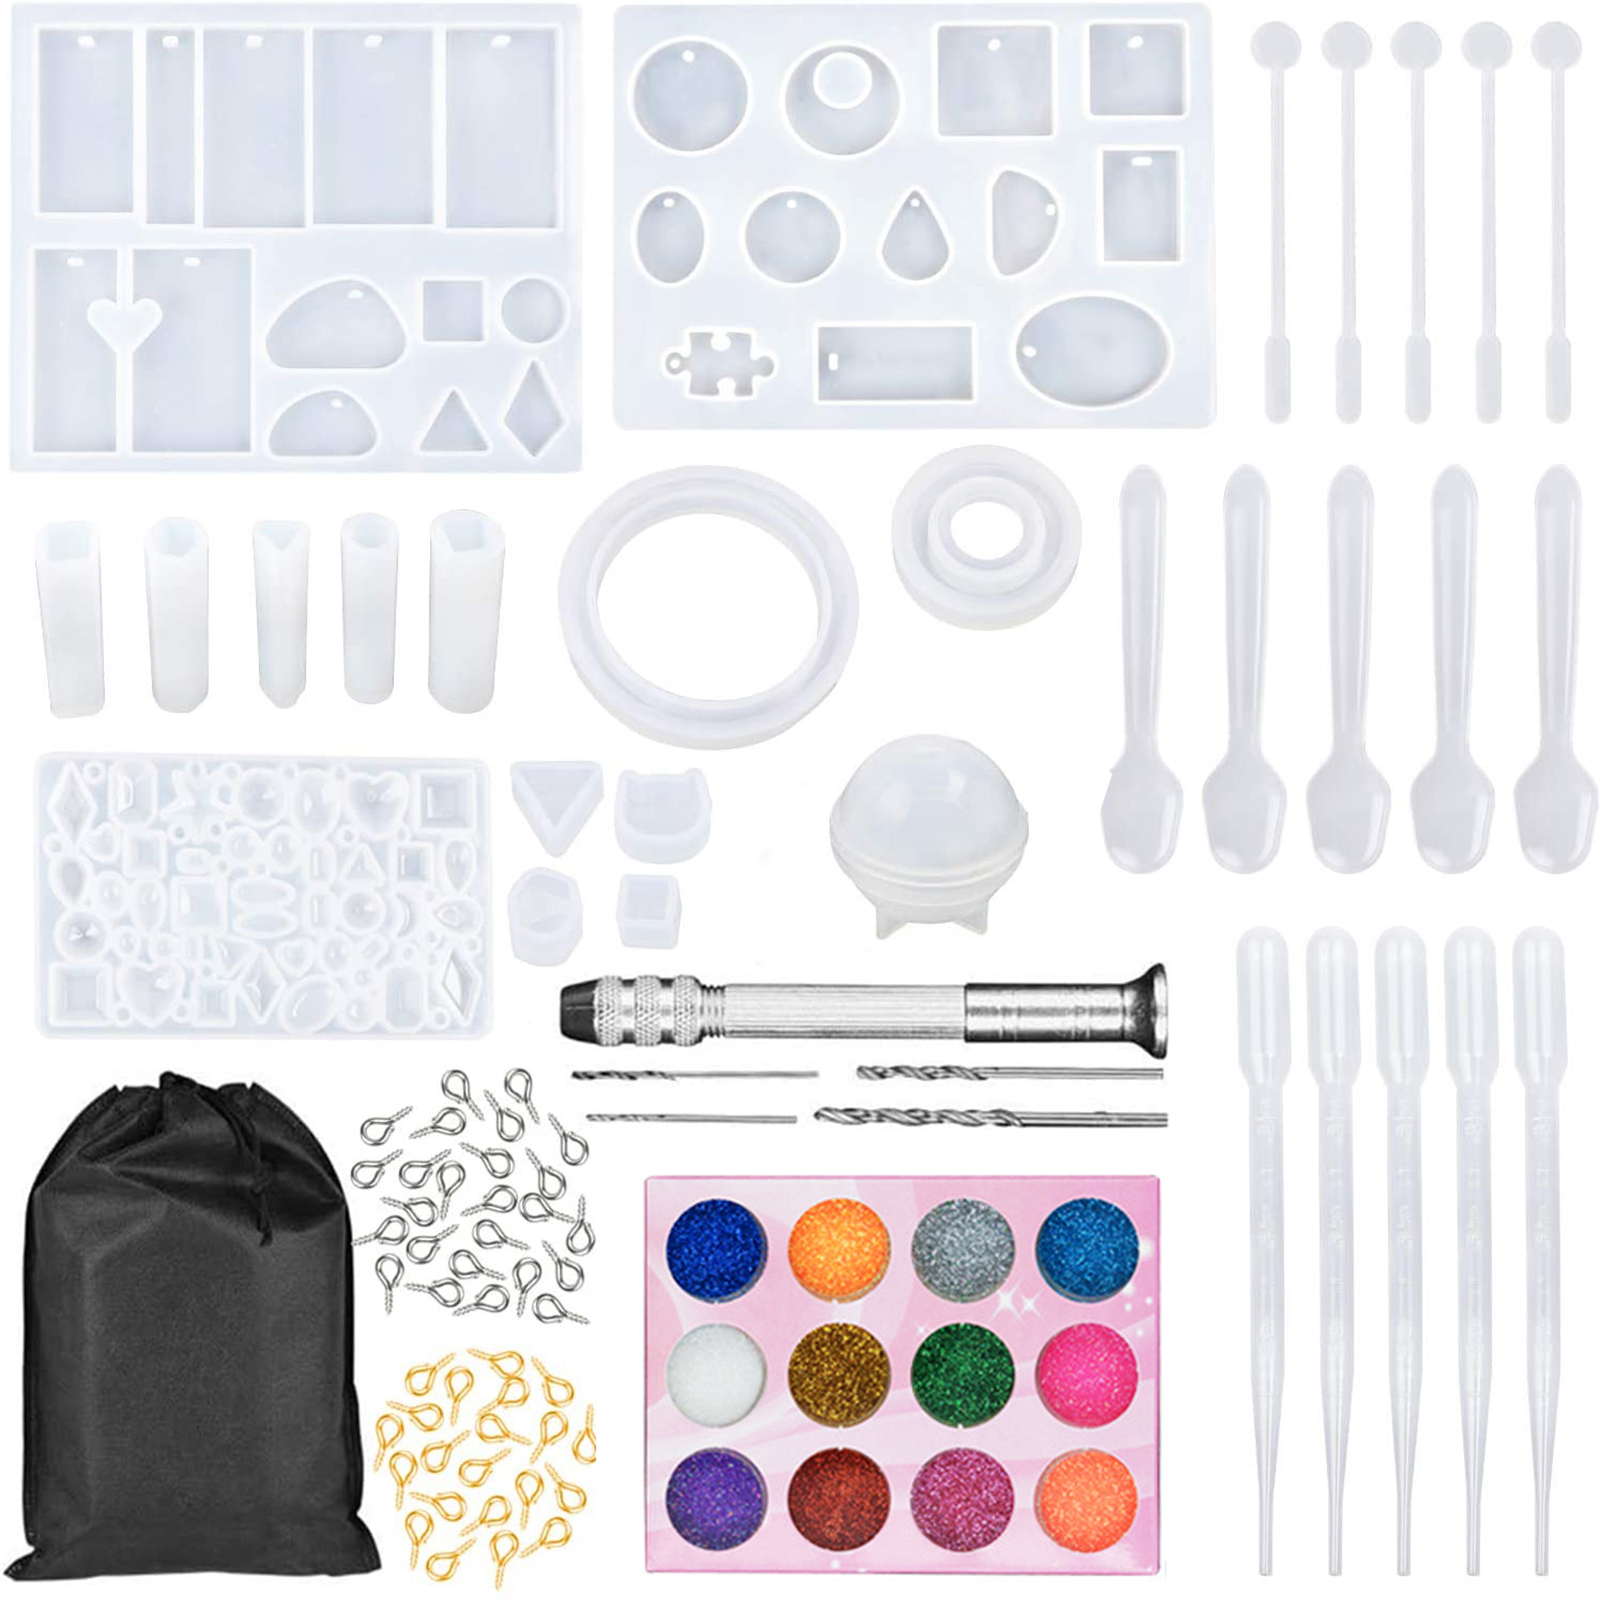 137Pcs/Set Resin Jewelry Making Starter Kit - Resin Kits for Beginners with  Molds and Resin Jewelry Making Supplies - Silicone Casting Mold, Tools Set  for DIY Jewelry Craft 